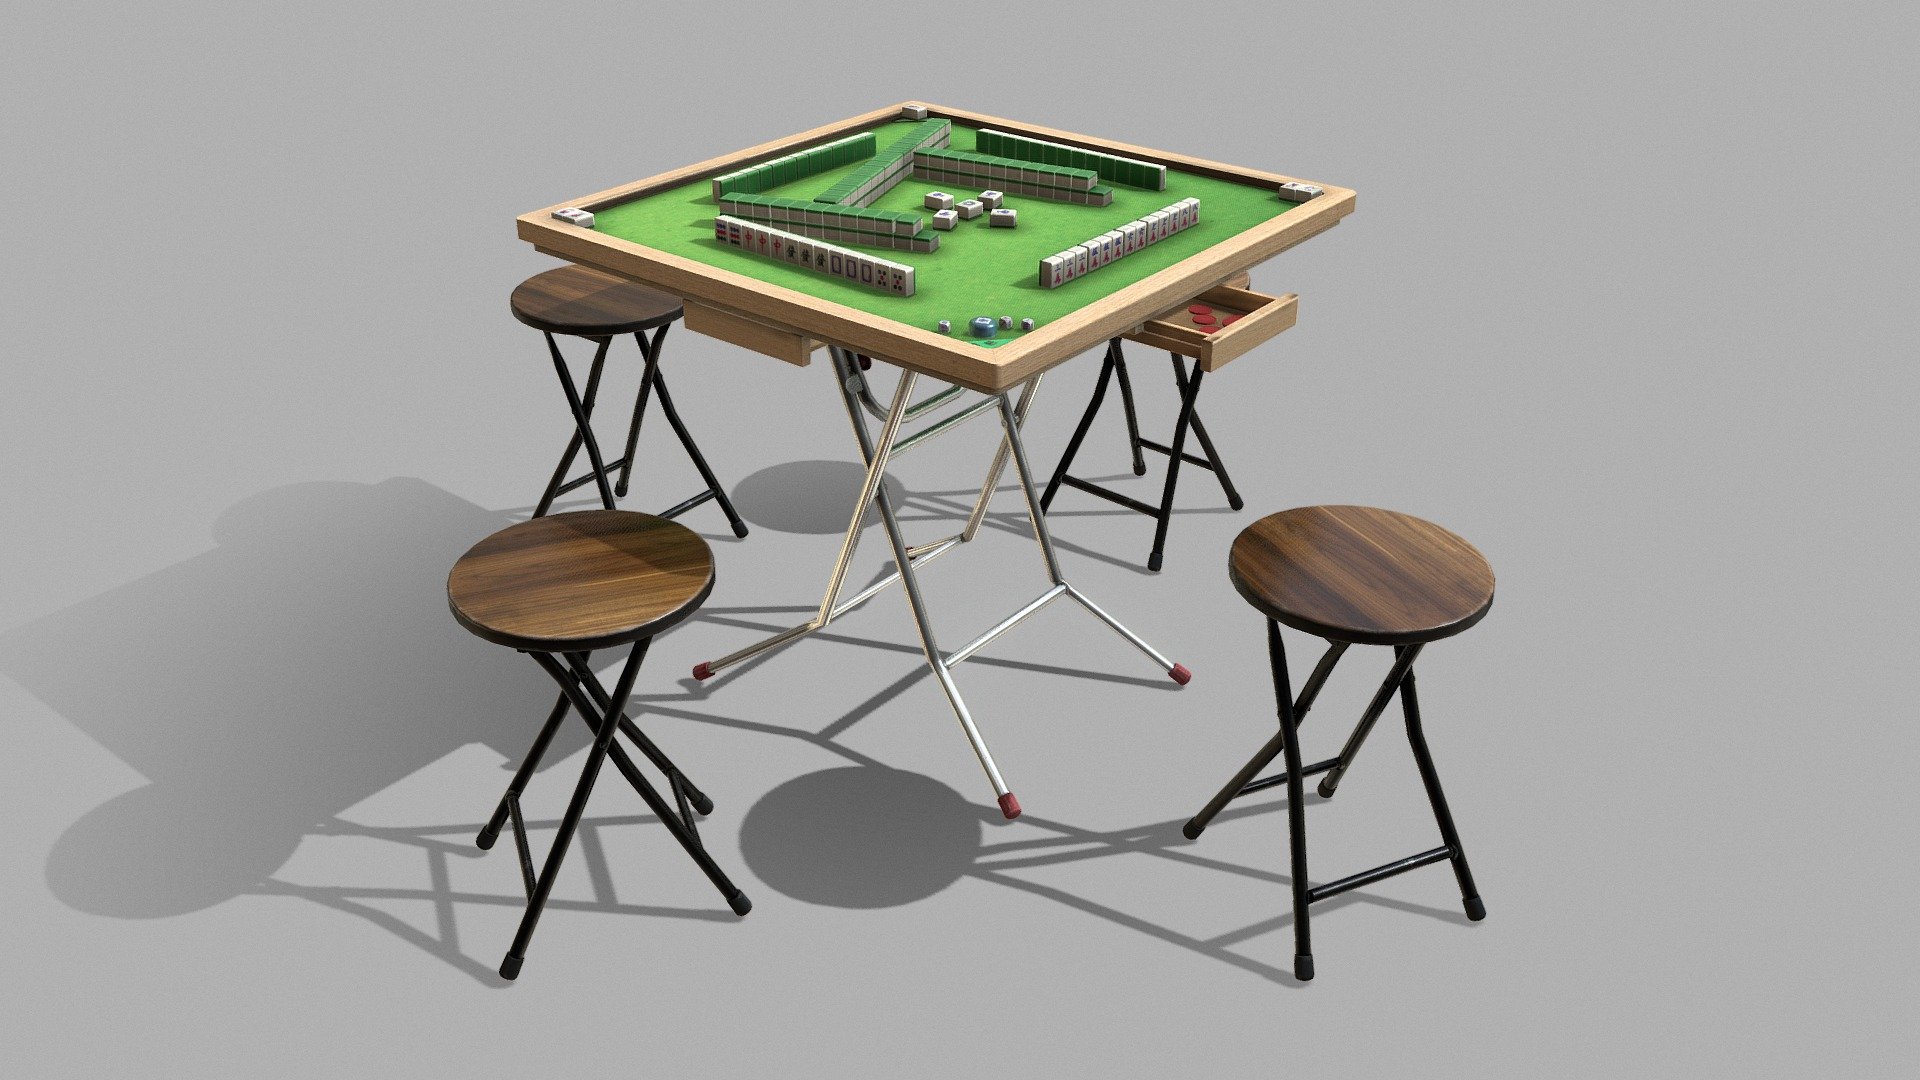 PBR Hong Kong Mahjong 麻將 Game Ready

Textures Map (4K) : PBR Unity Unity HDRP Unreal

Mainly 4 material and 4 set of Texures for whole set of Mahjong

Real time render in Unity HDRP:
https://youtu.be/iCPsfRsYCic - PBR Hong Kong Mahjong 香港麻將 Game Ready - 3D model by Cola River (@colar09714) 3d model